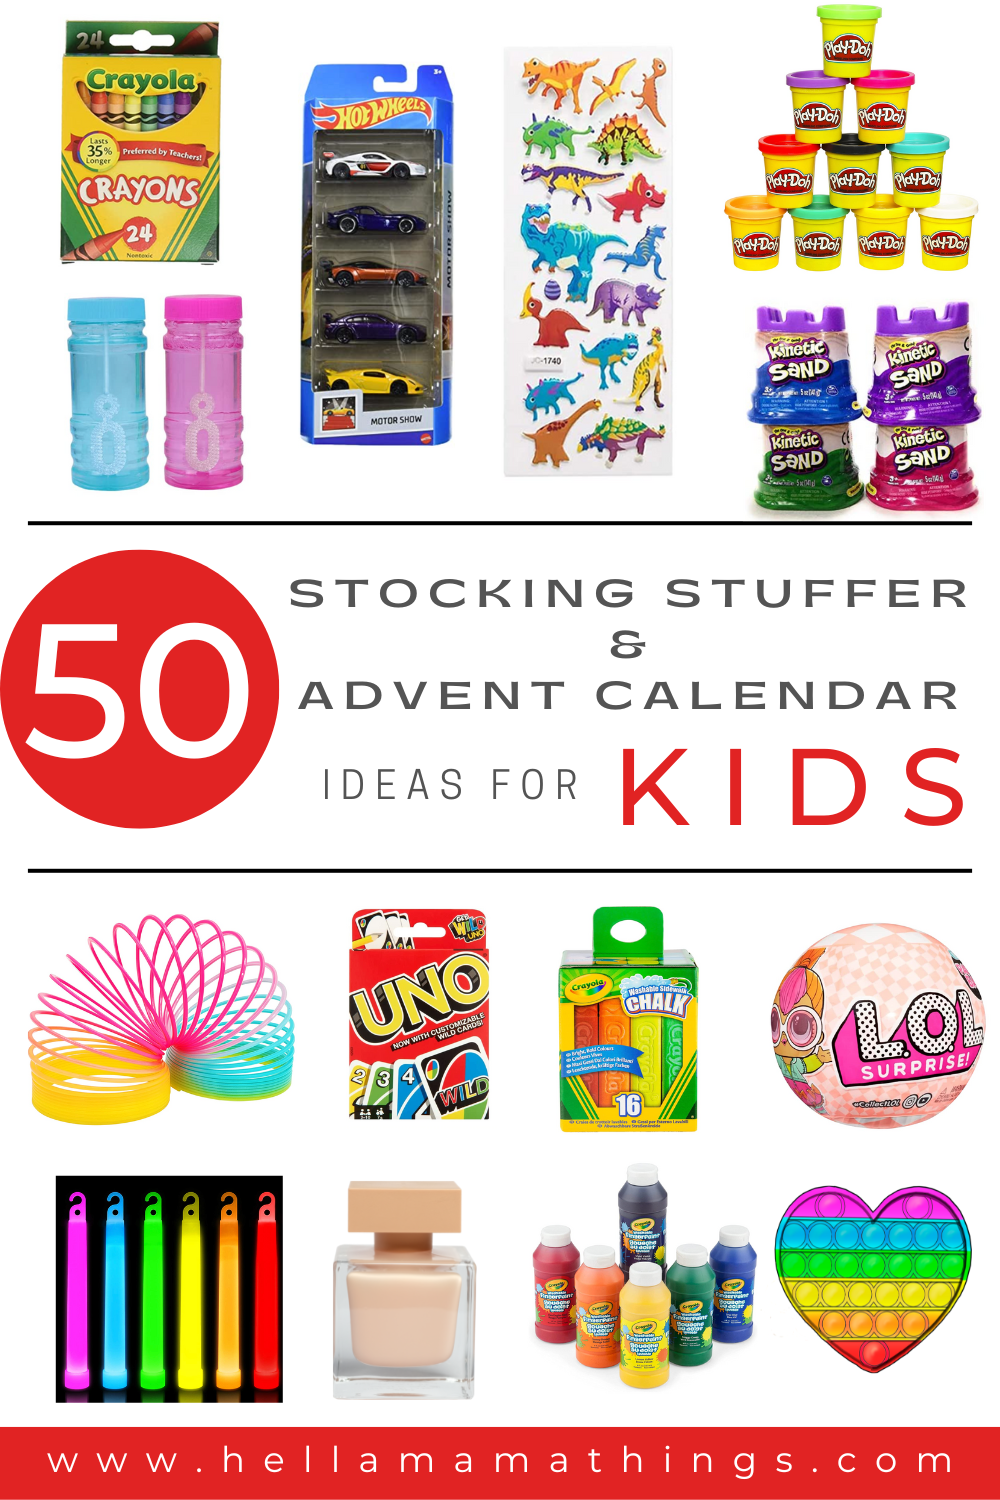 Pinterest Pin - 50 Stocking Stuffers & Advent Calendar Ideas for Kids. Title surrounded by pictures of toys and crafts.